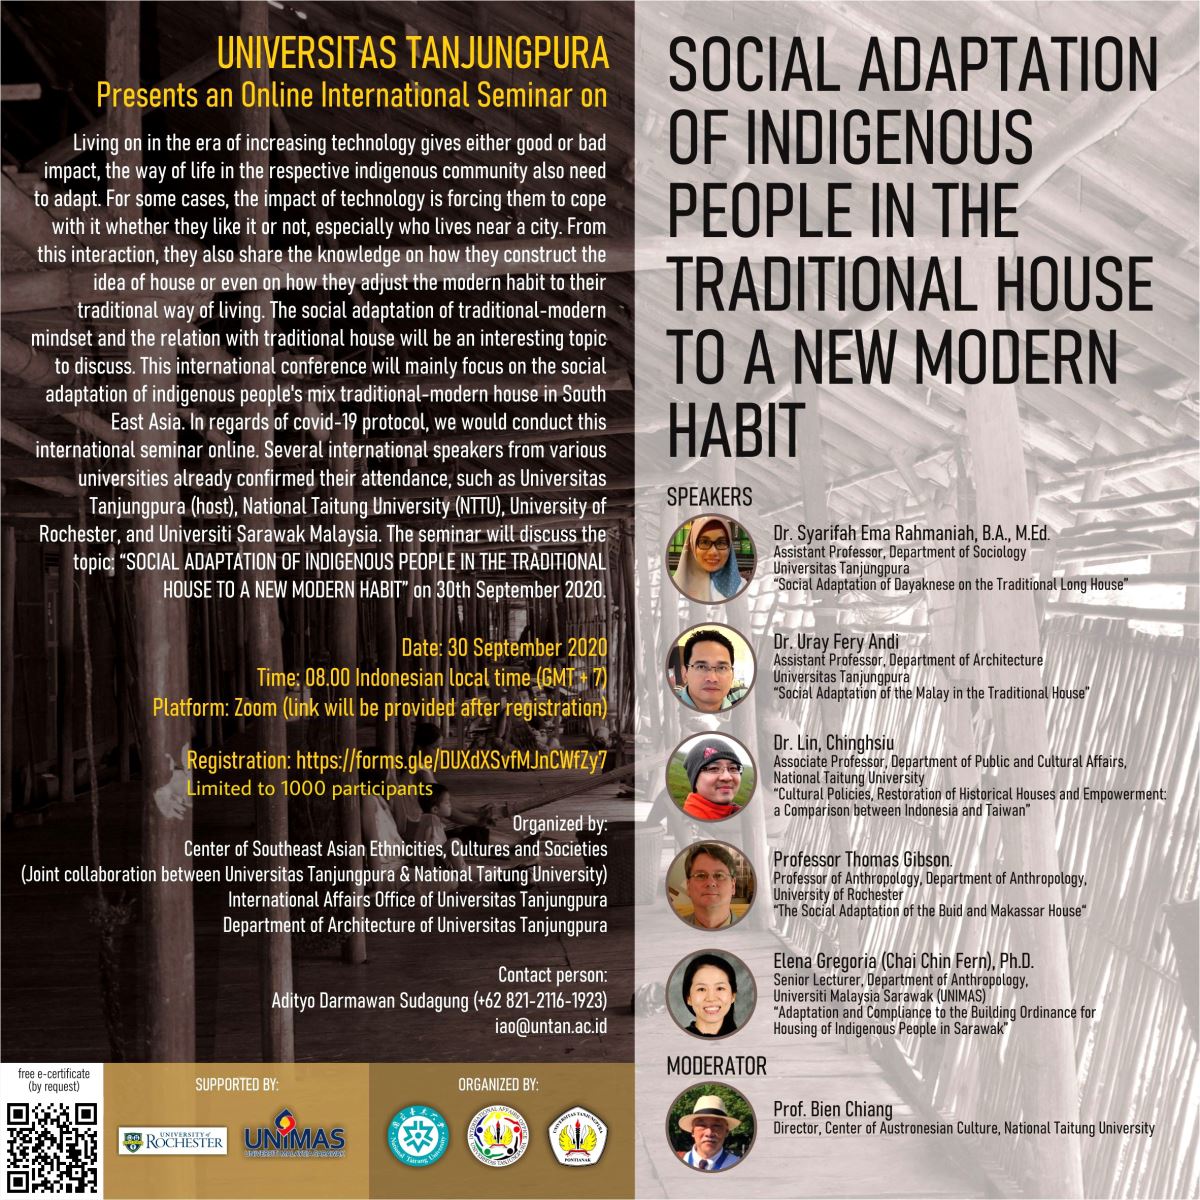 SOCIAL ADAPTATION OF INDIGENOUS PEOPLE IN THE TRADITIONAL HOUSE TO A NEW MODERN HABIT